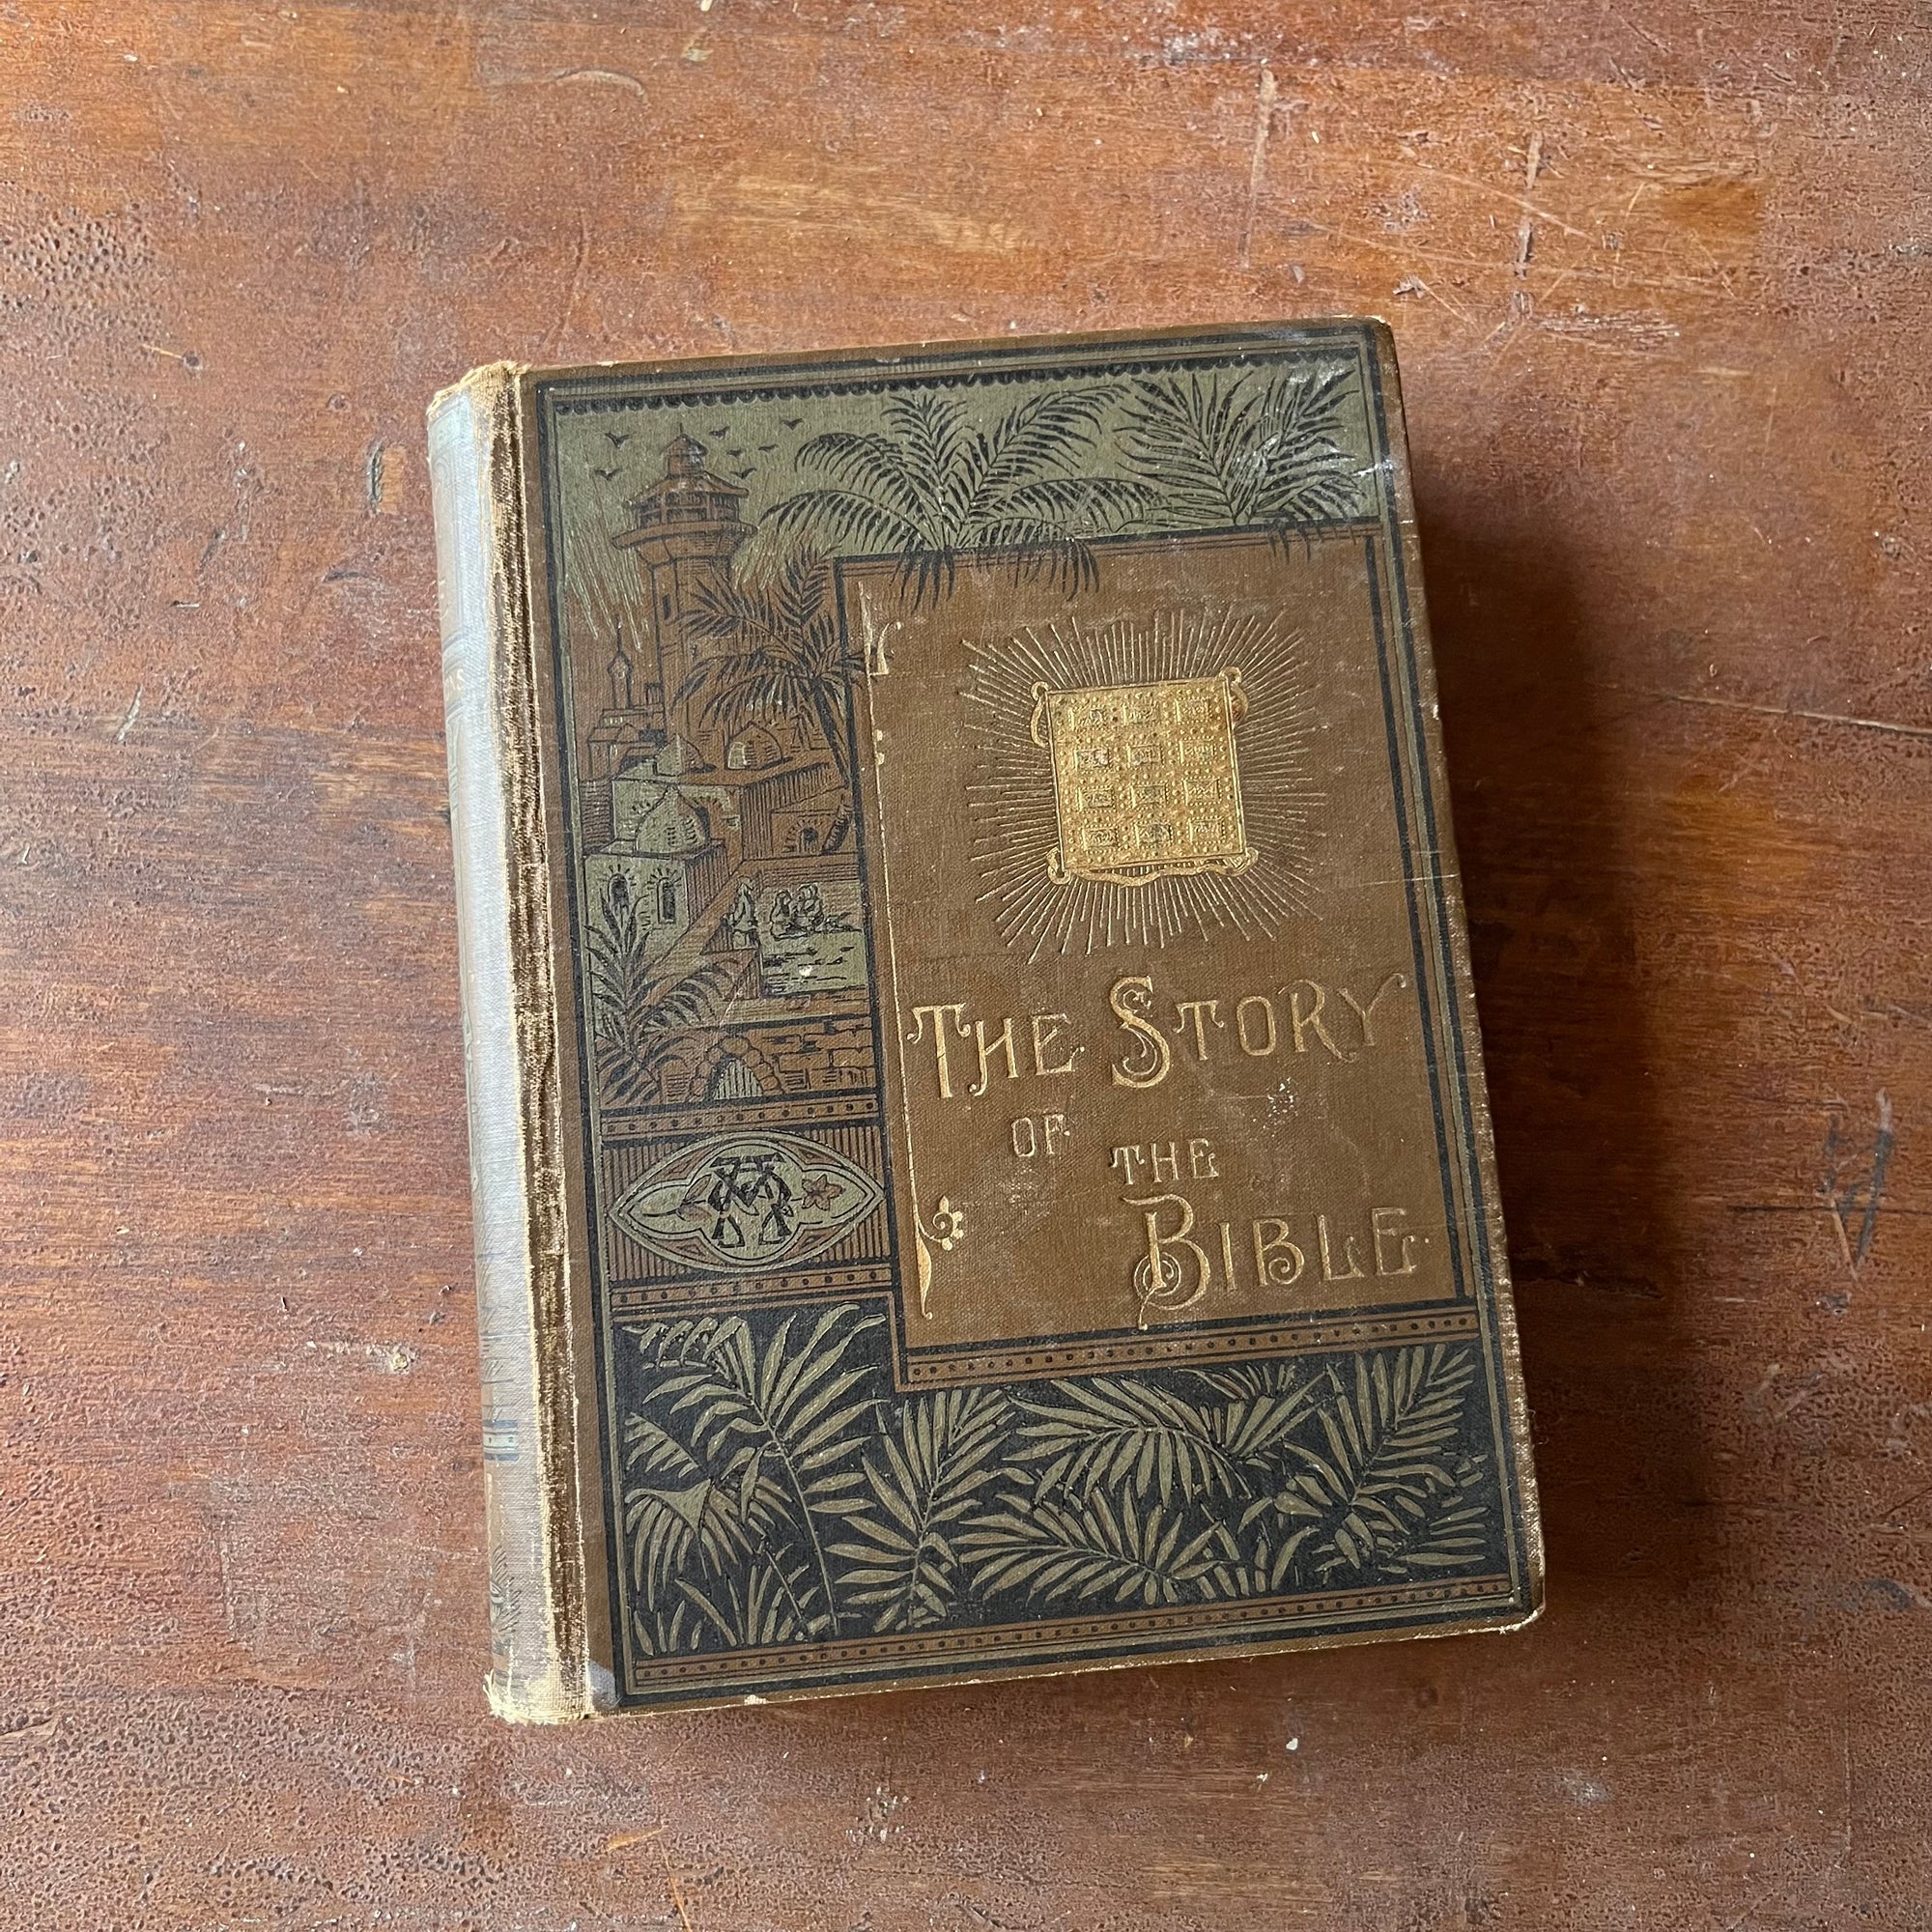 Log Cabin Vintage - antique book, antique bible story, antique religious text - The Story of the Bible by Charles Foster 1884 - view of the embossed front cover